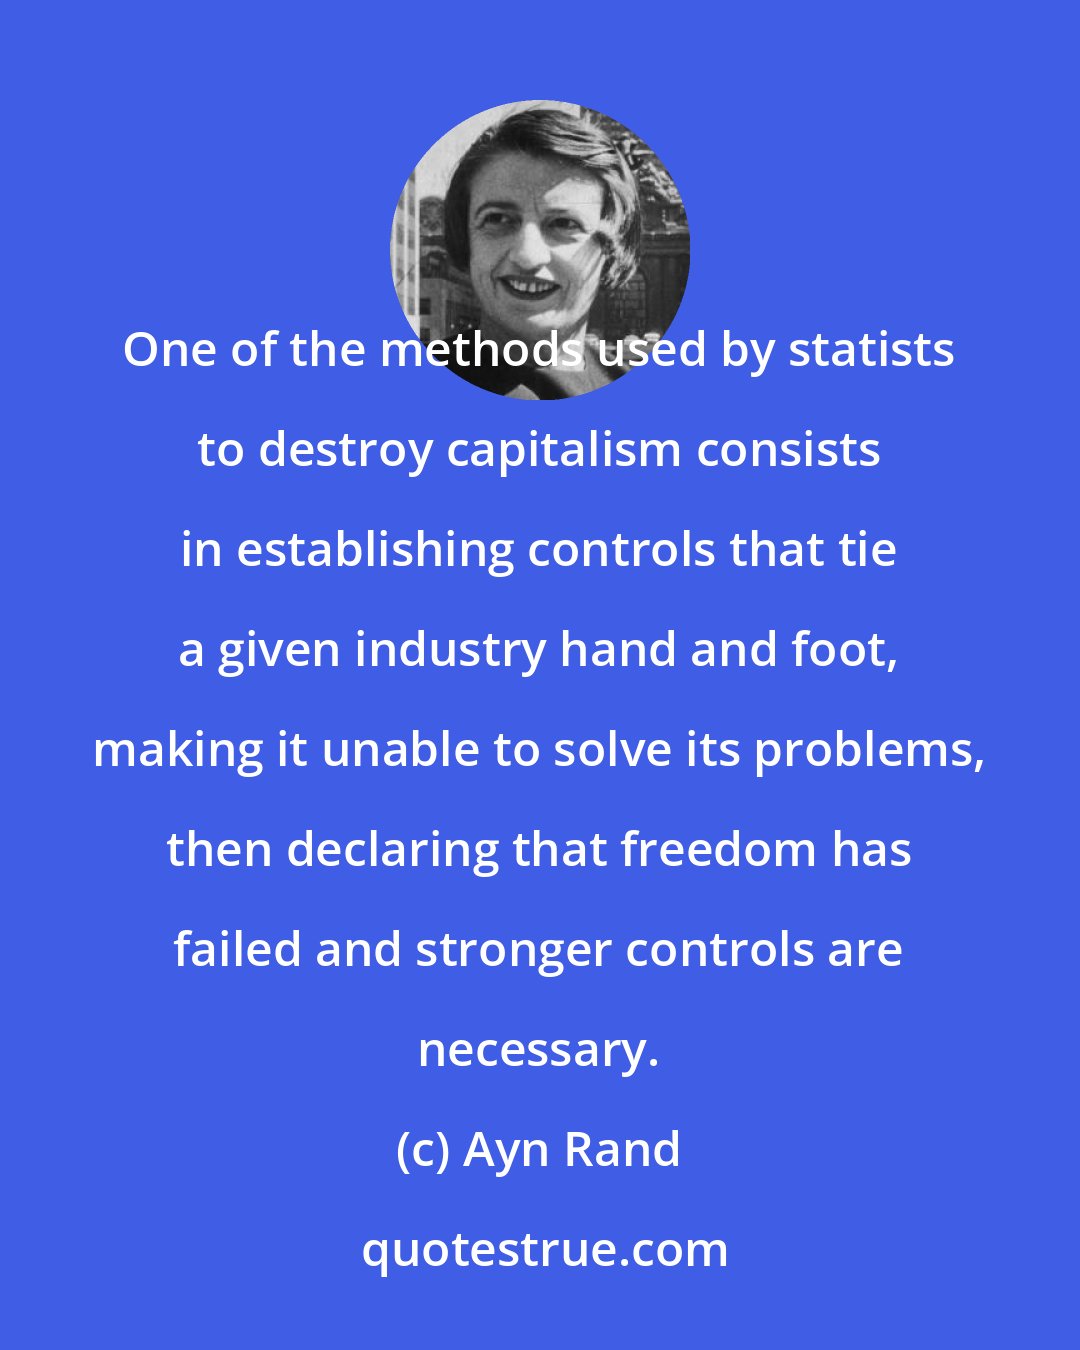 Ayn Rand: One of the methods used by statists to destroy capitalism consists in establishing controls that tie a given industry hand and foot, making it unable to solve its problems, then declaring that freedom has failed and stronger controls are necessary.